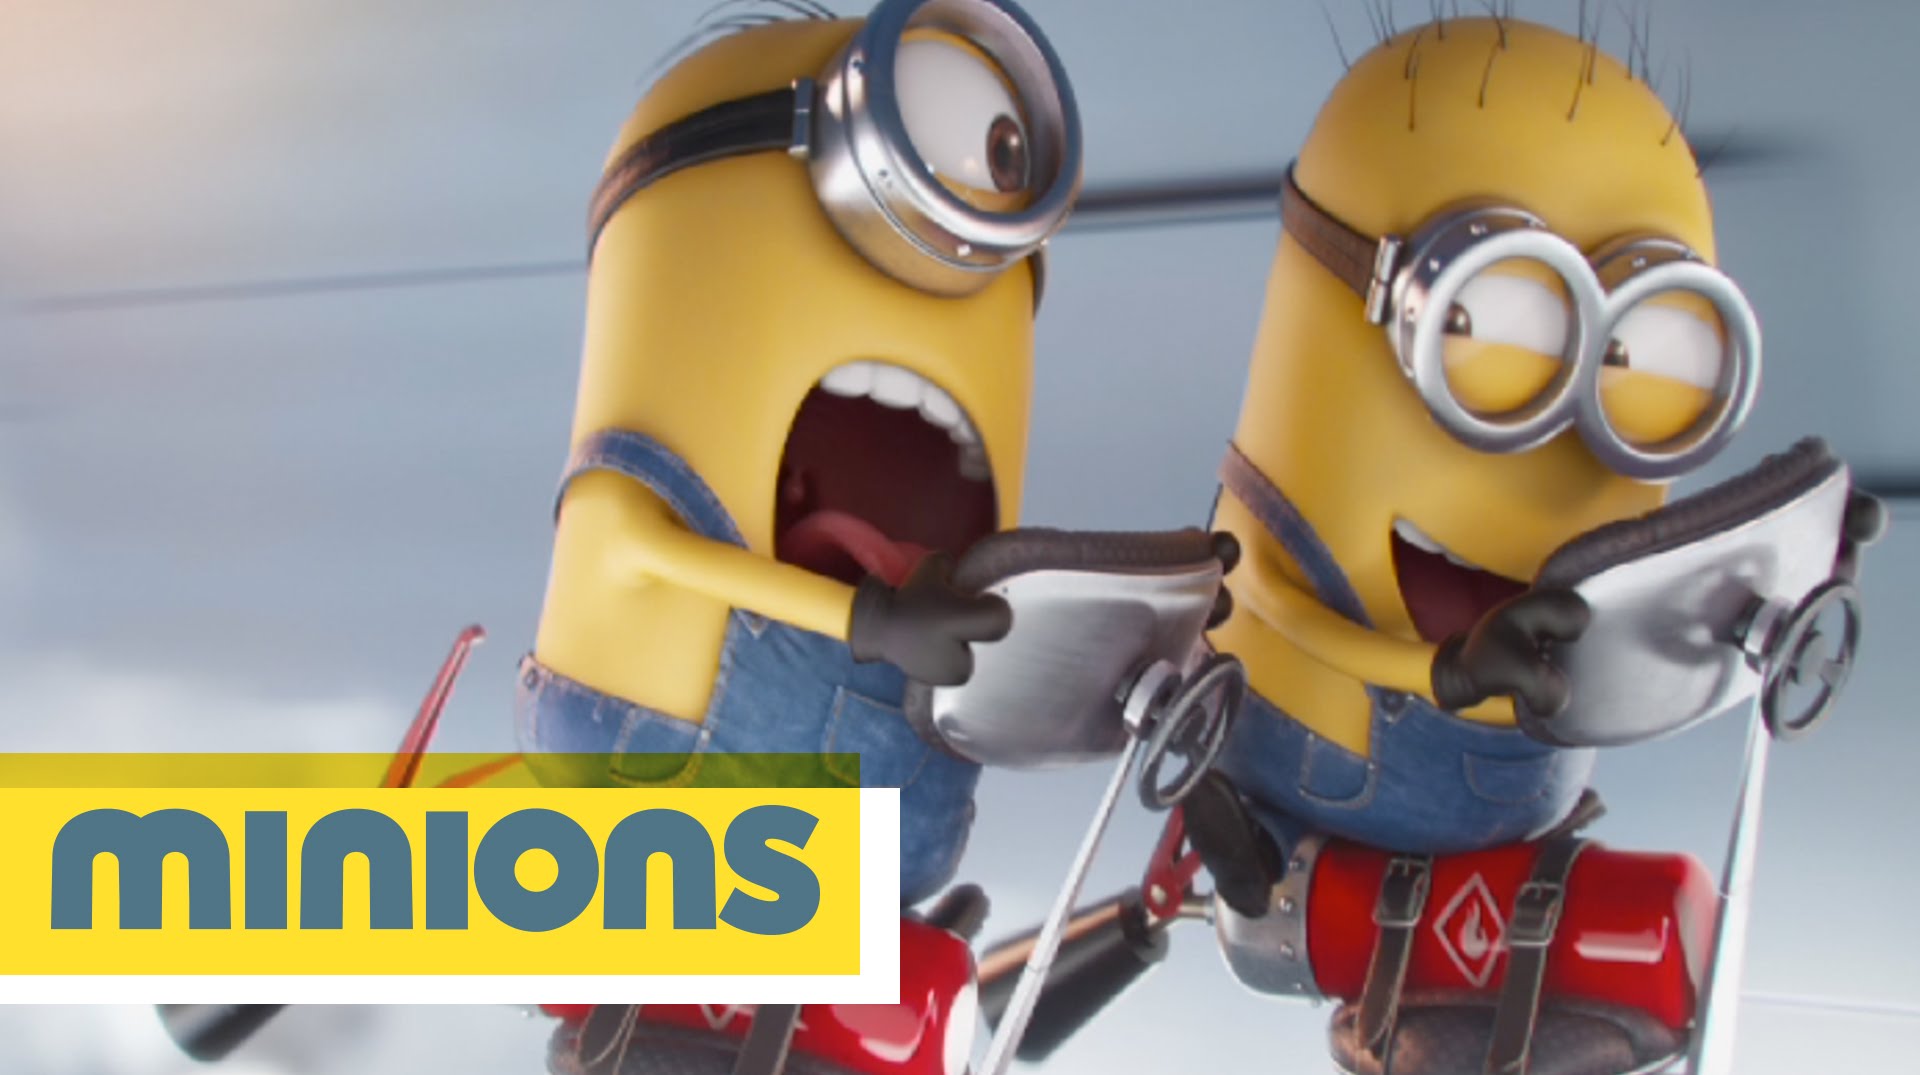 the-competition-a-new-minions-mini-movie-is-here-that-eric-alper